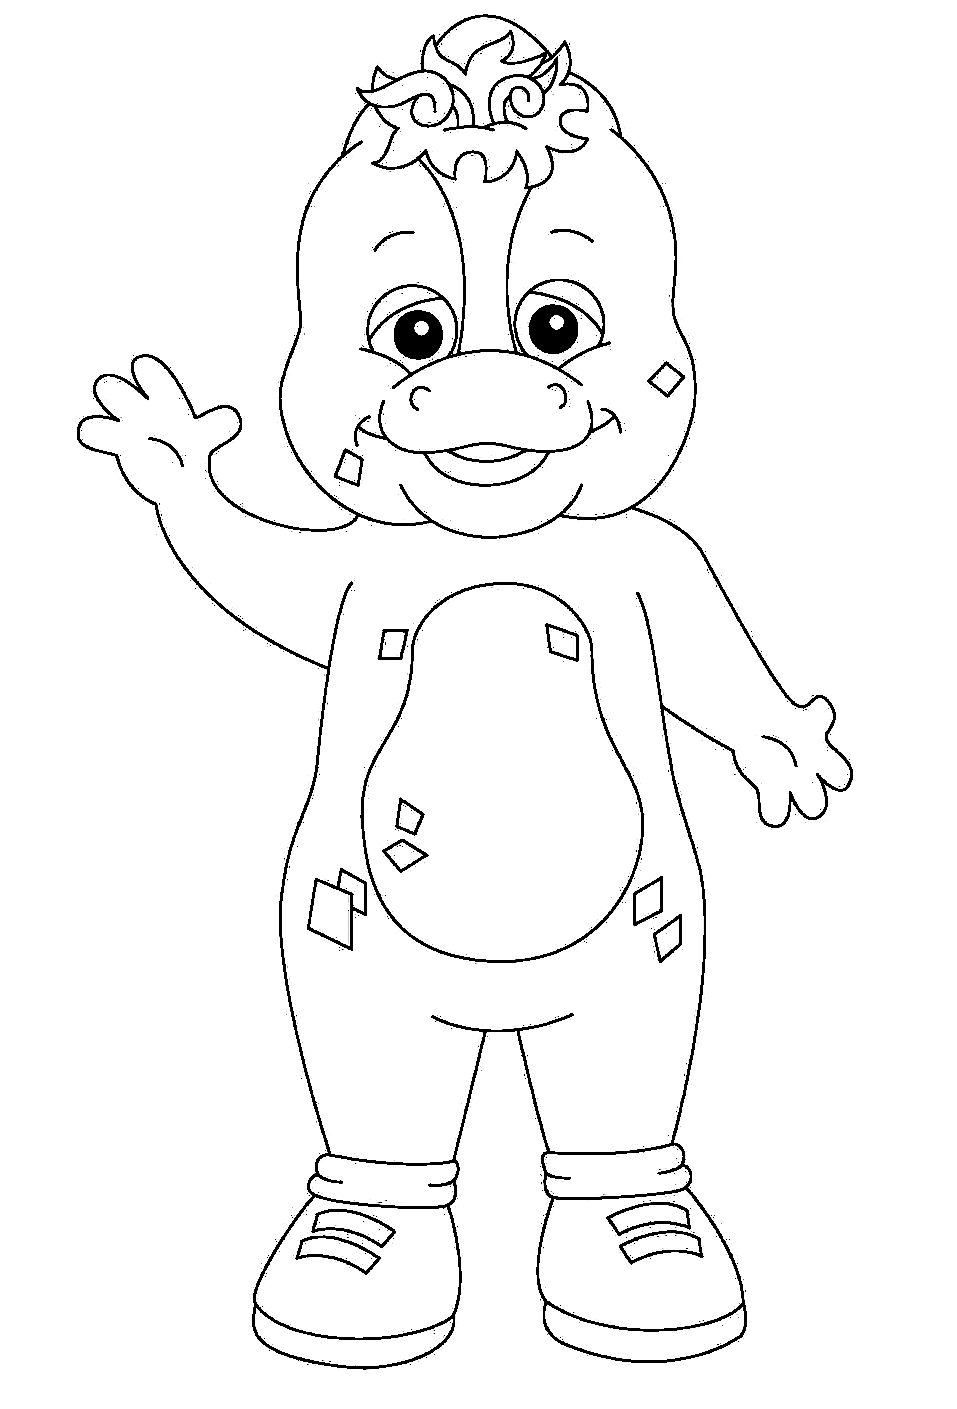 barney and friends coloring pages birthday